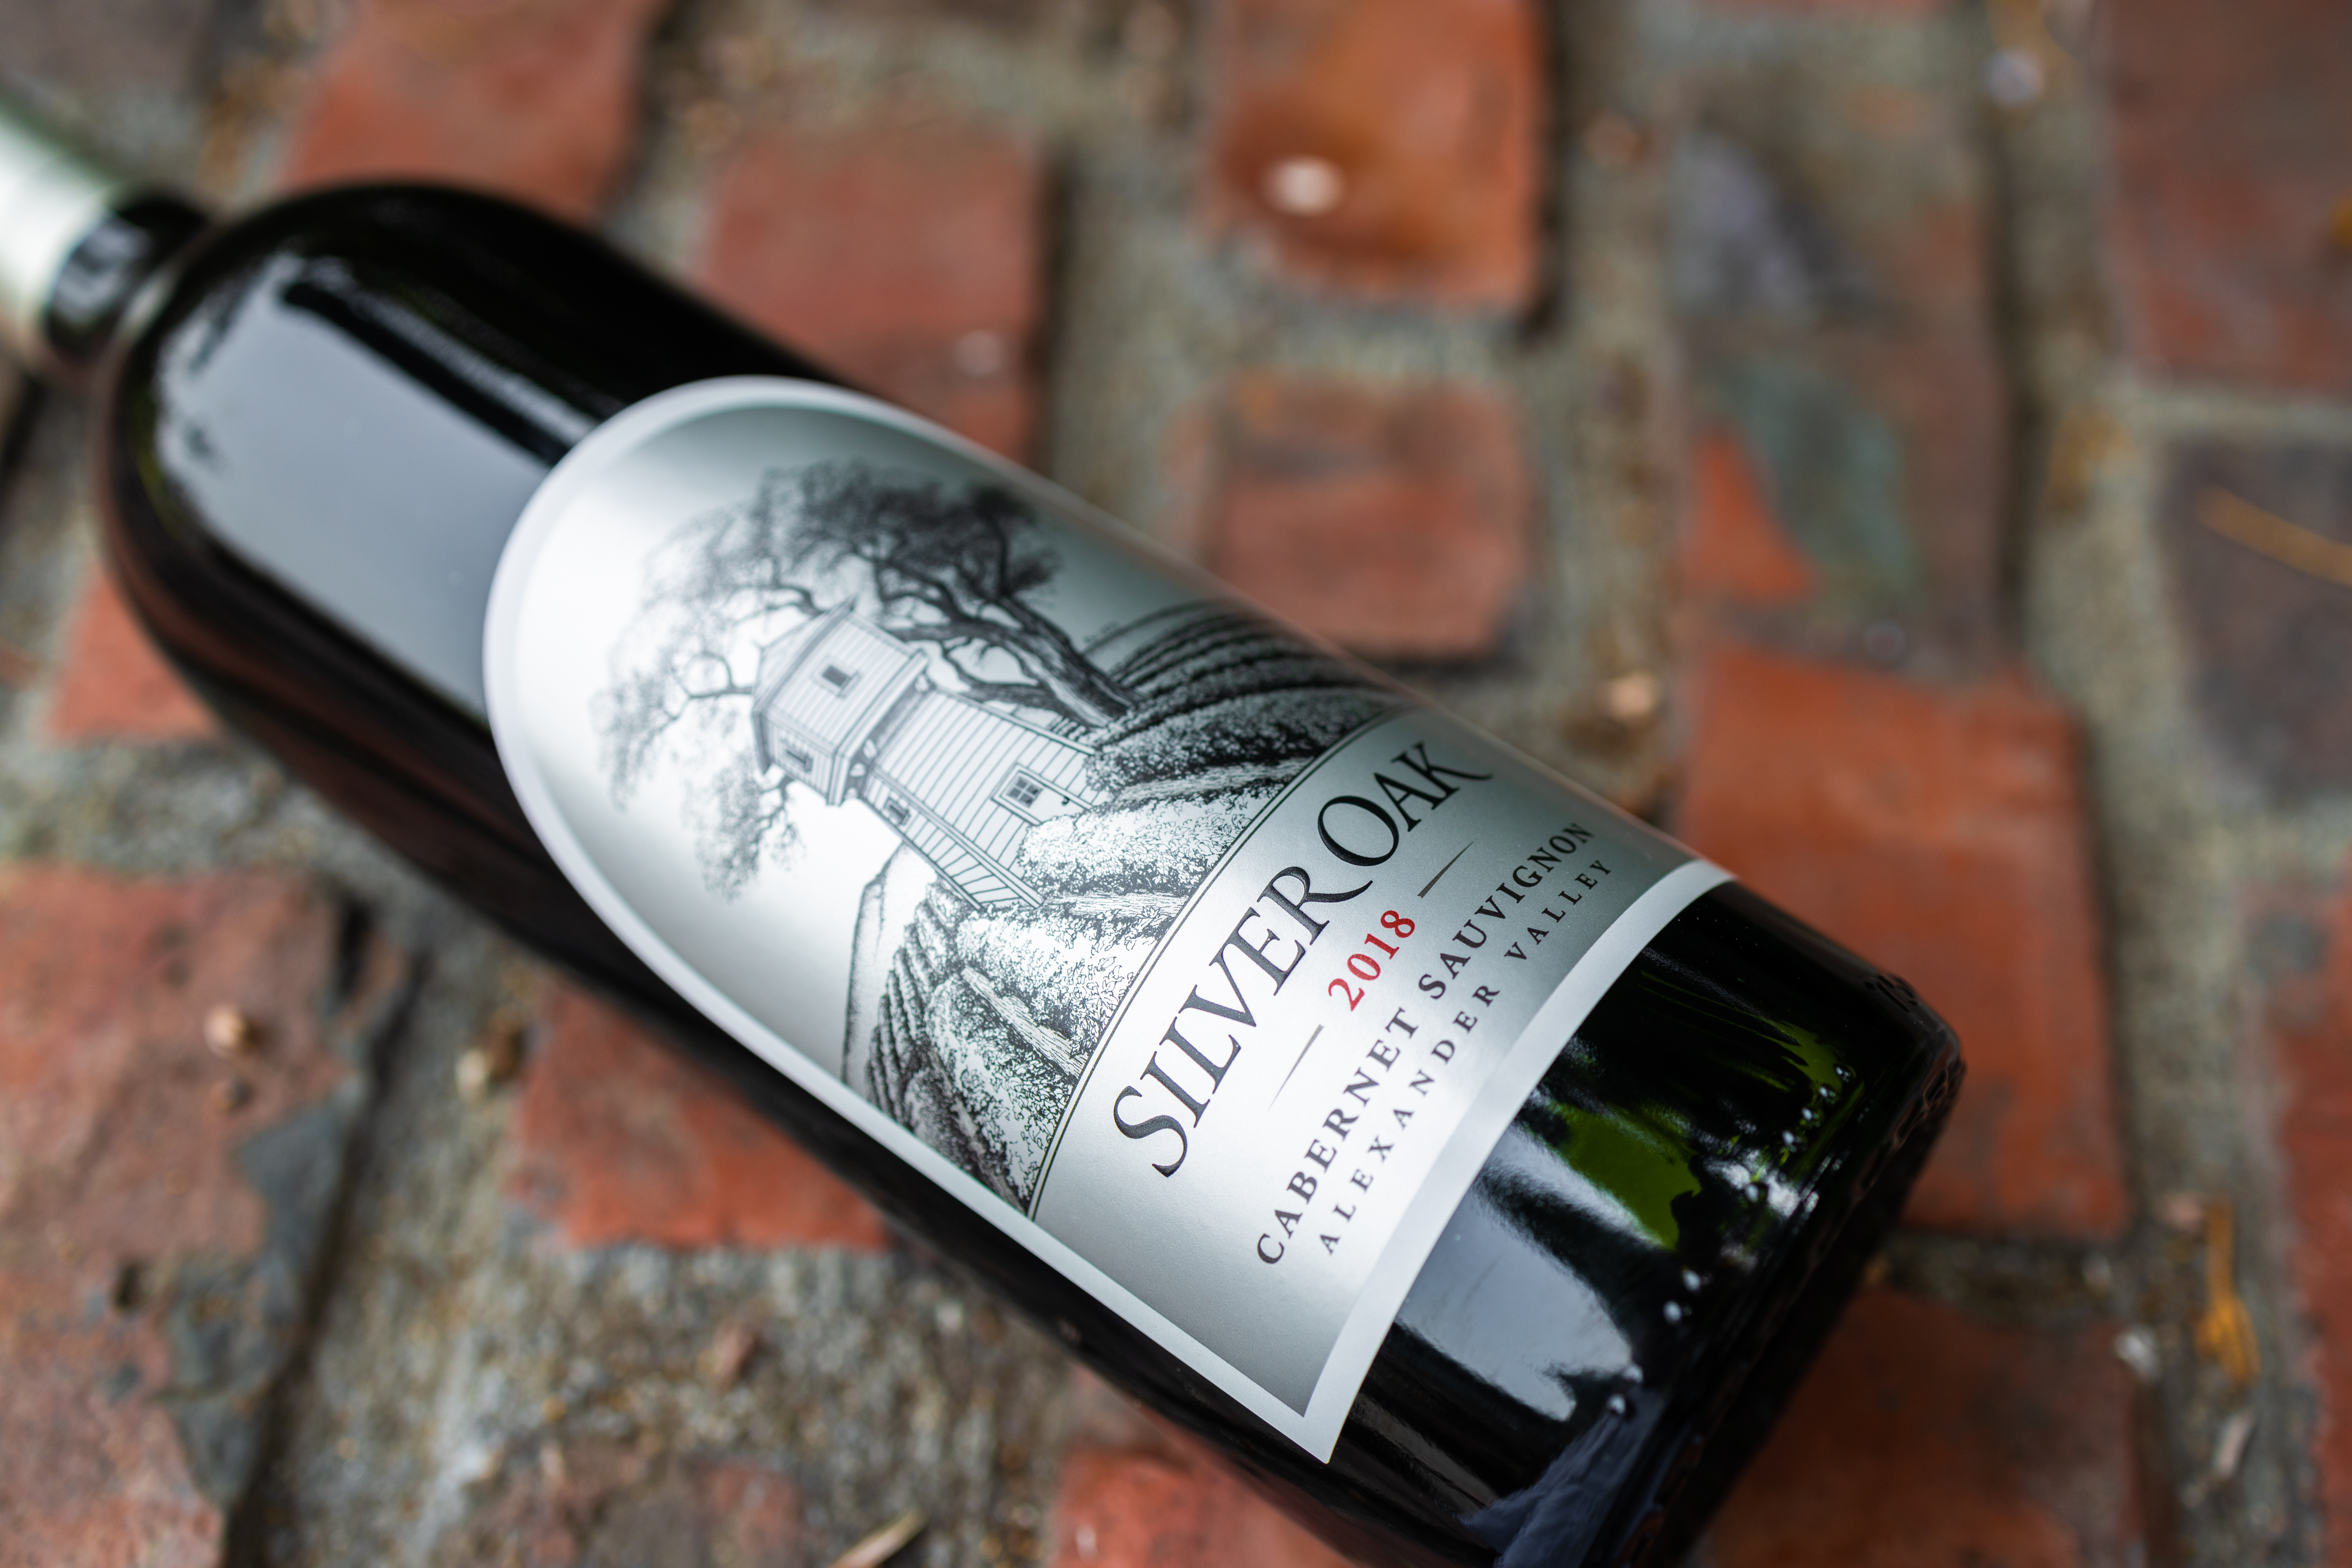 A bottle of wine from Silver Oak Winery who is celebrating 50 years of winemaking.